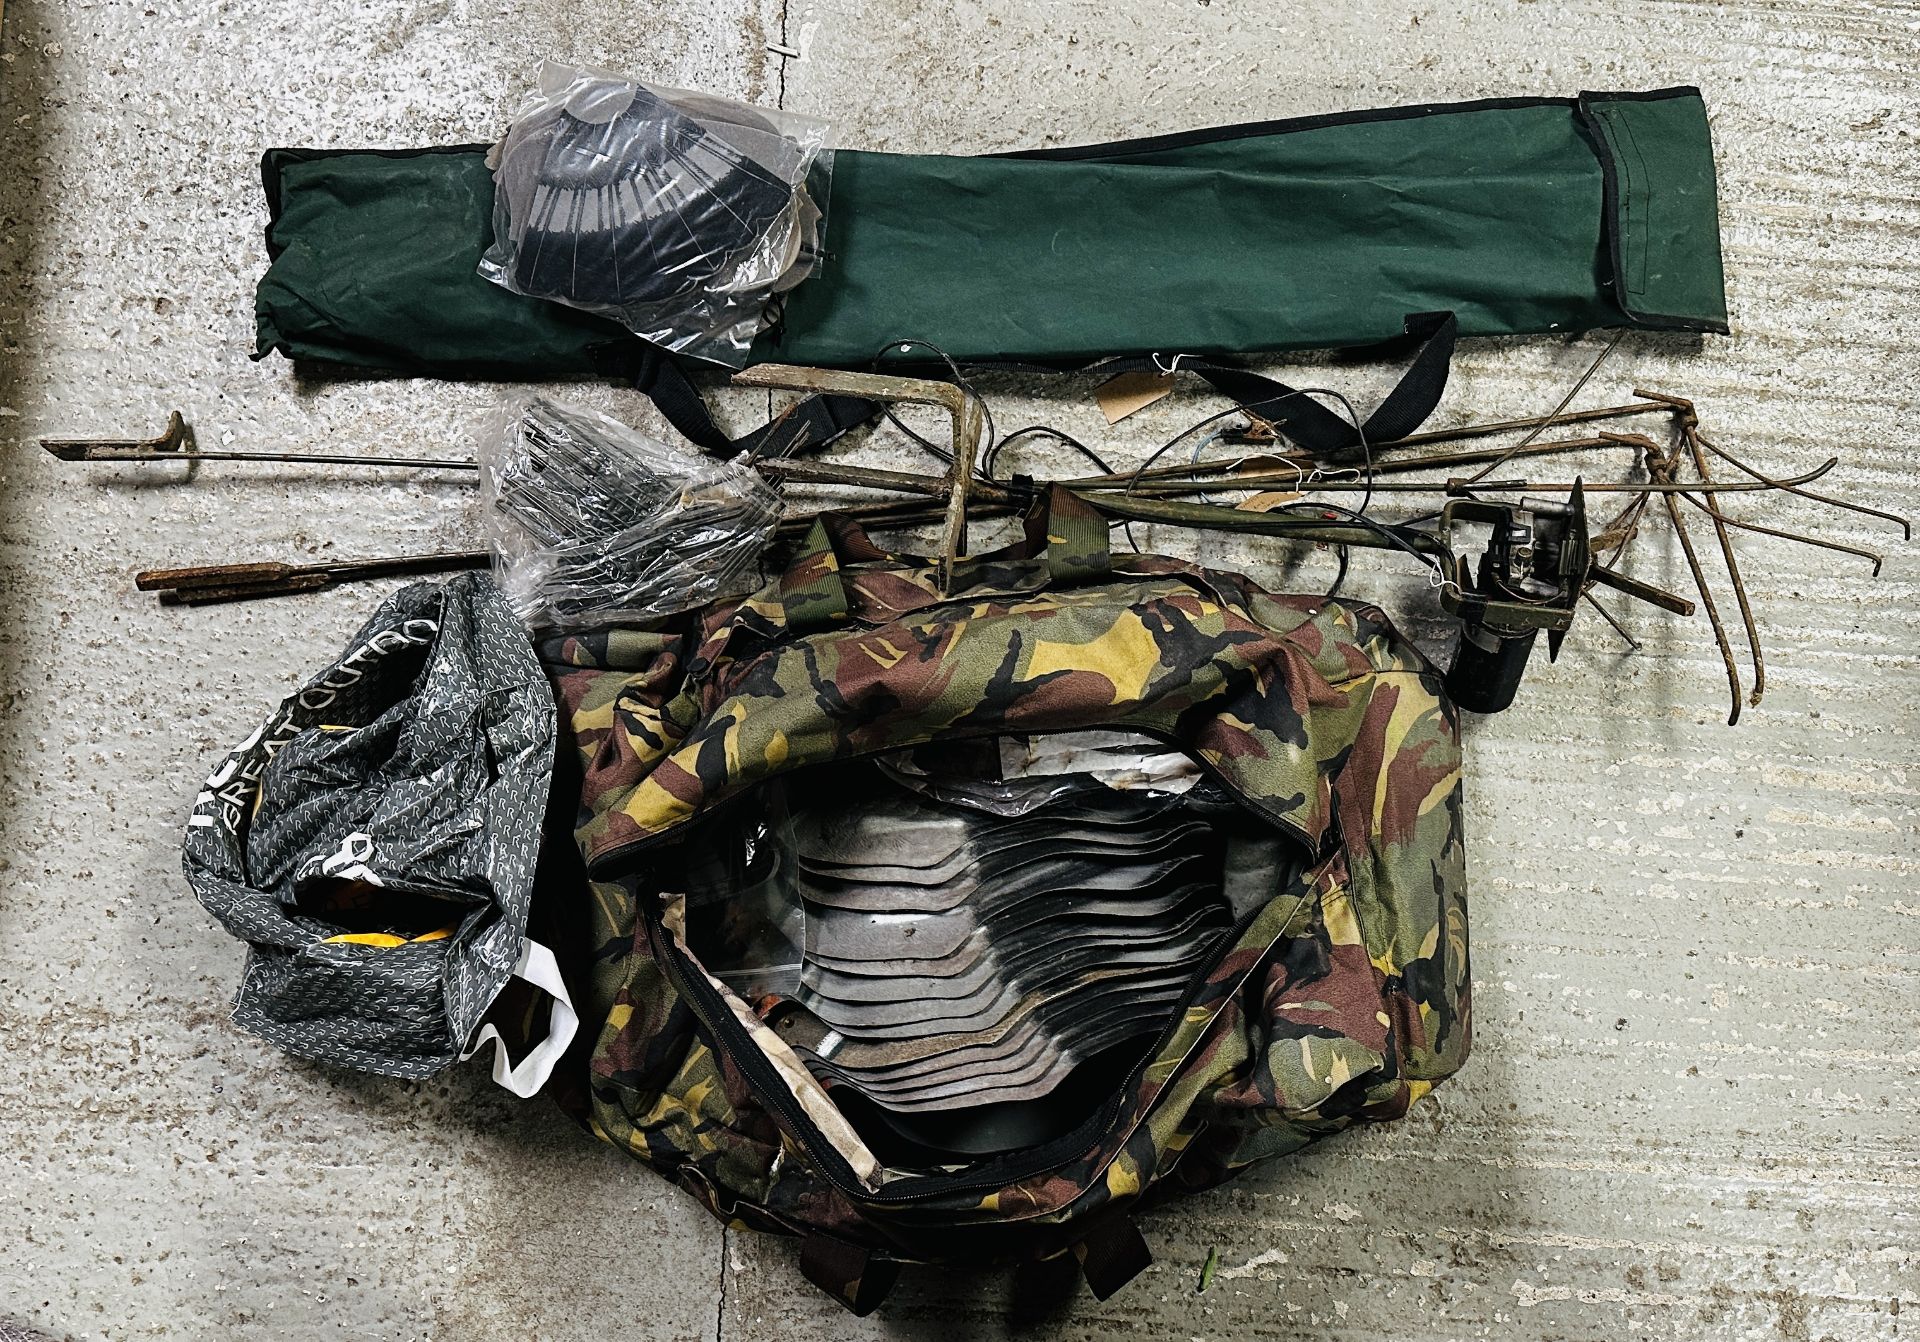 FOUR TELESCOPIC HIDE POLES, CARRY BAG WITH 19 SKEET PIGEON DECOYS , 2 FULL BODY DECOYS,